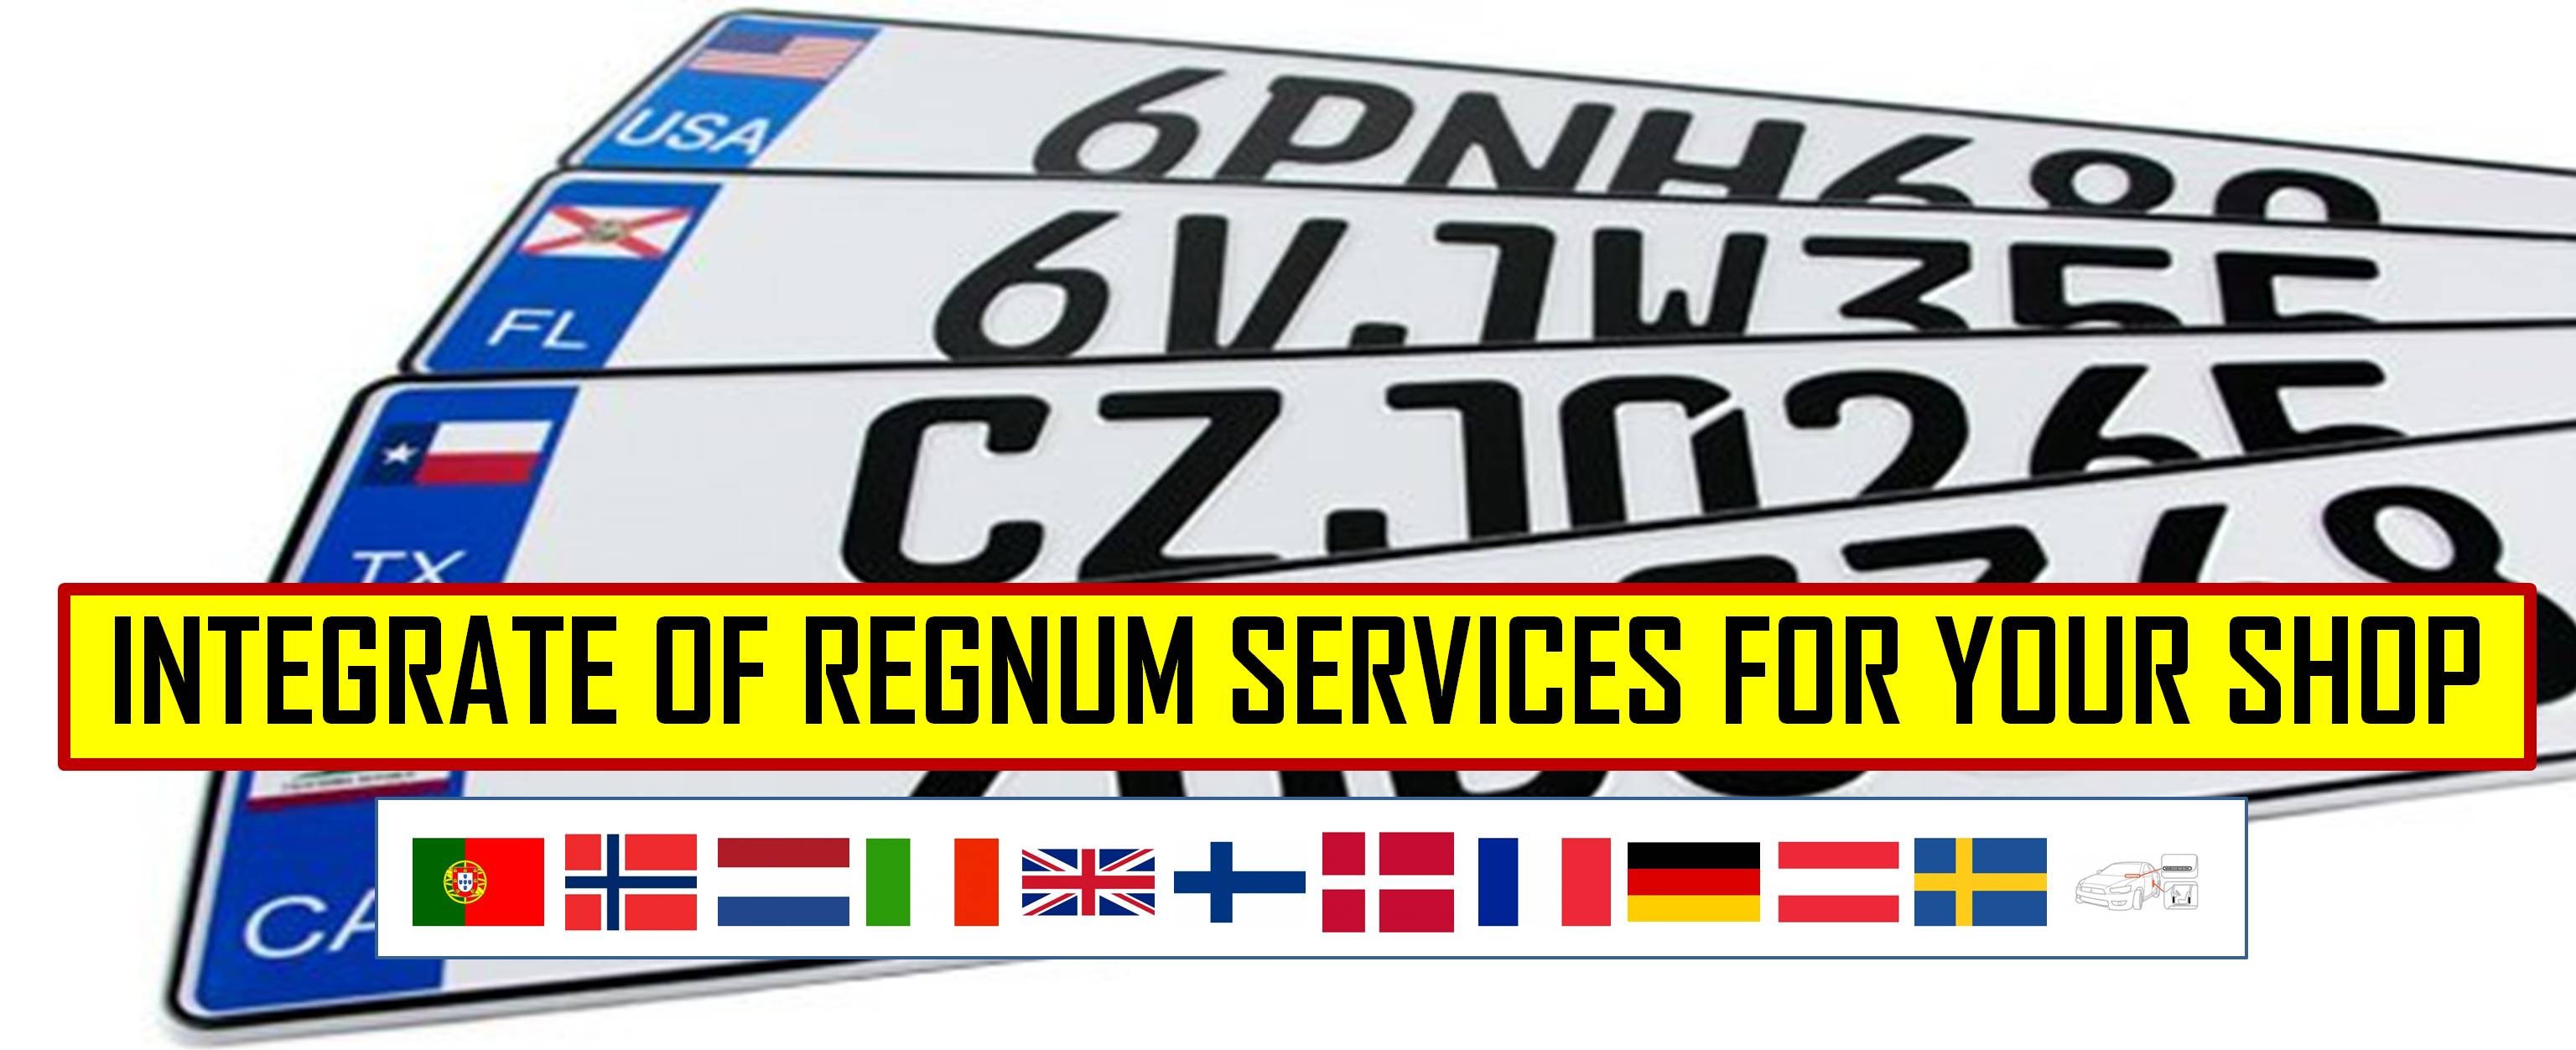 REGNUM [LICENSE PLATE] SERVICES FOR DIFFERENT COUNTRIES | INTEGRATE SERVICES